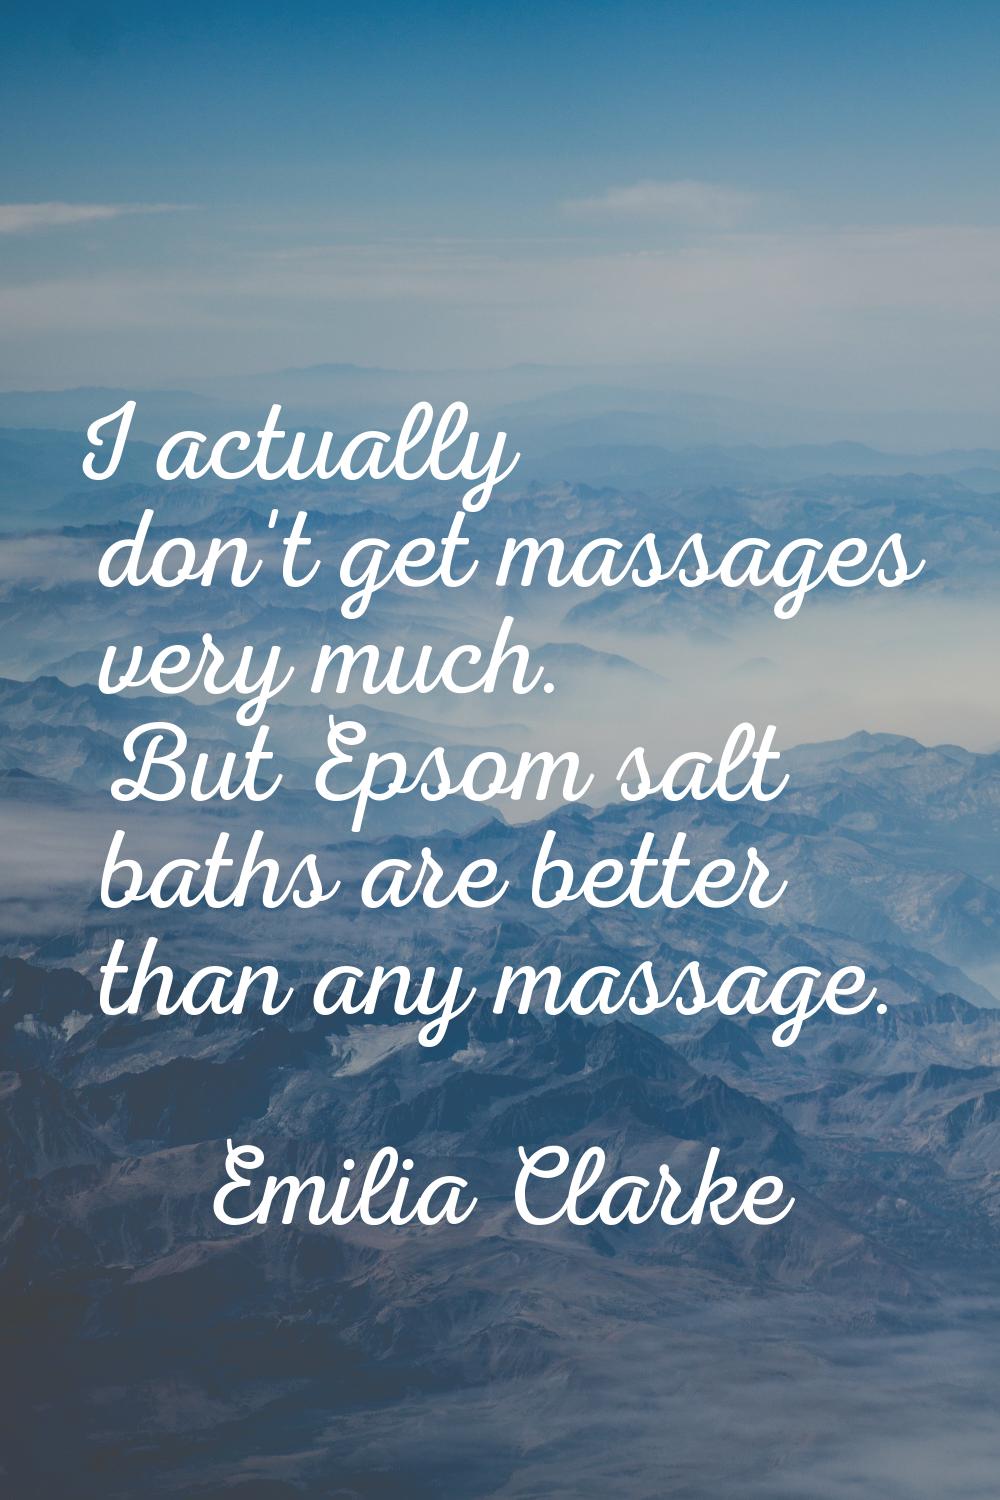 I actually don't get massages very much. But Epsom salt baths are better than any massage.